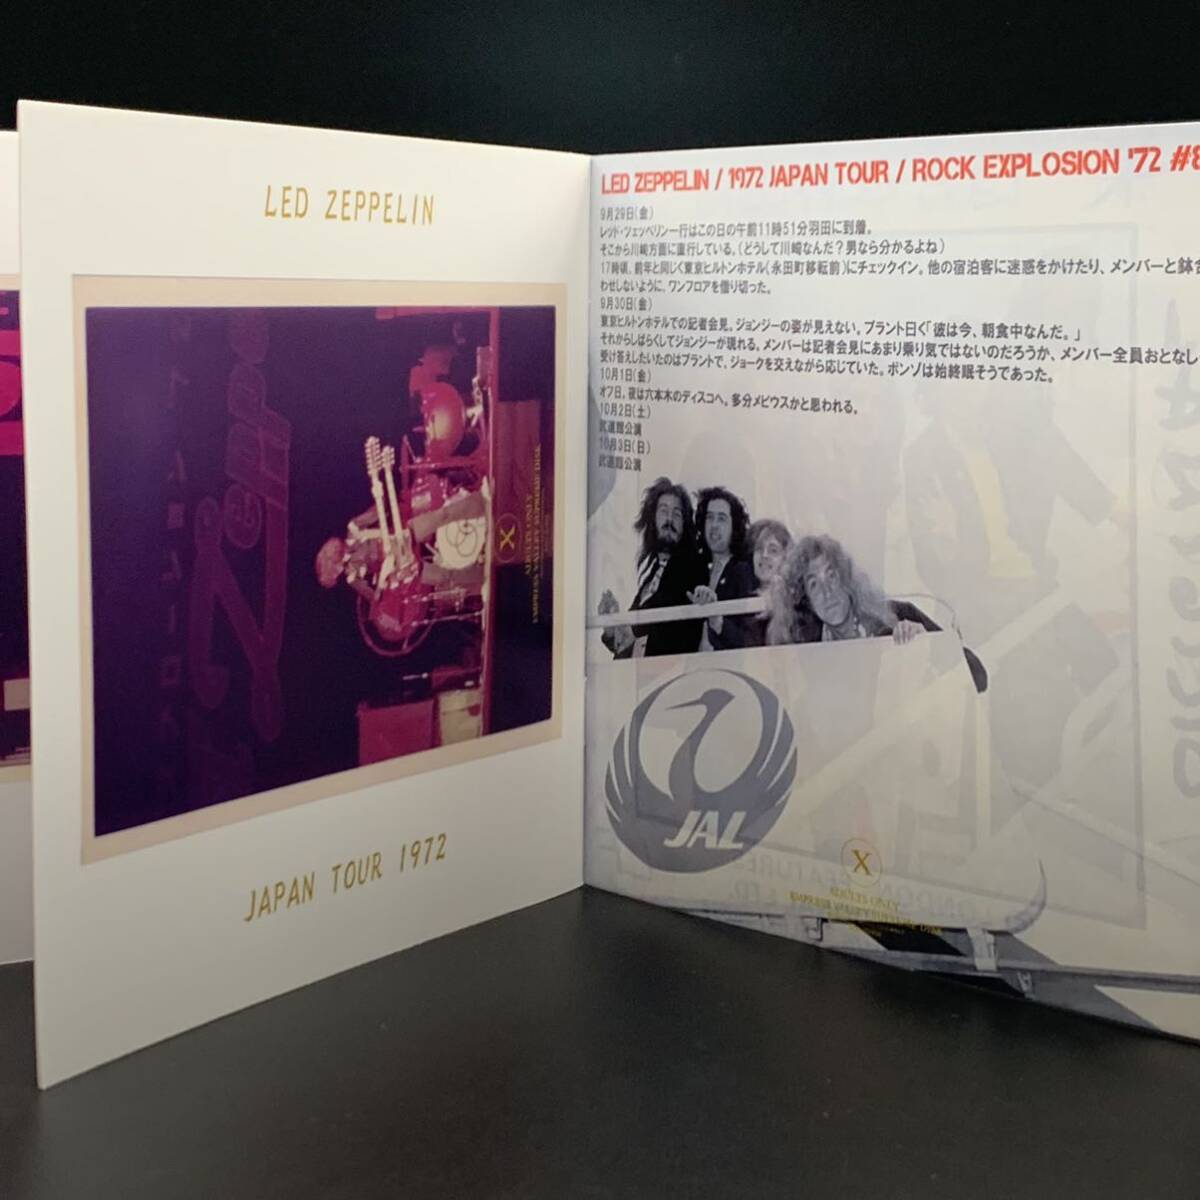 LED ZEPPELIN / JET STREAM - Pro Use Only 4CD Box with Booklet Set : Super Rare!! Hard to Find!! For enthusiastic collector only!!の画像7